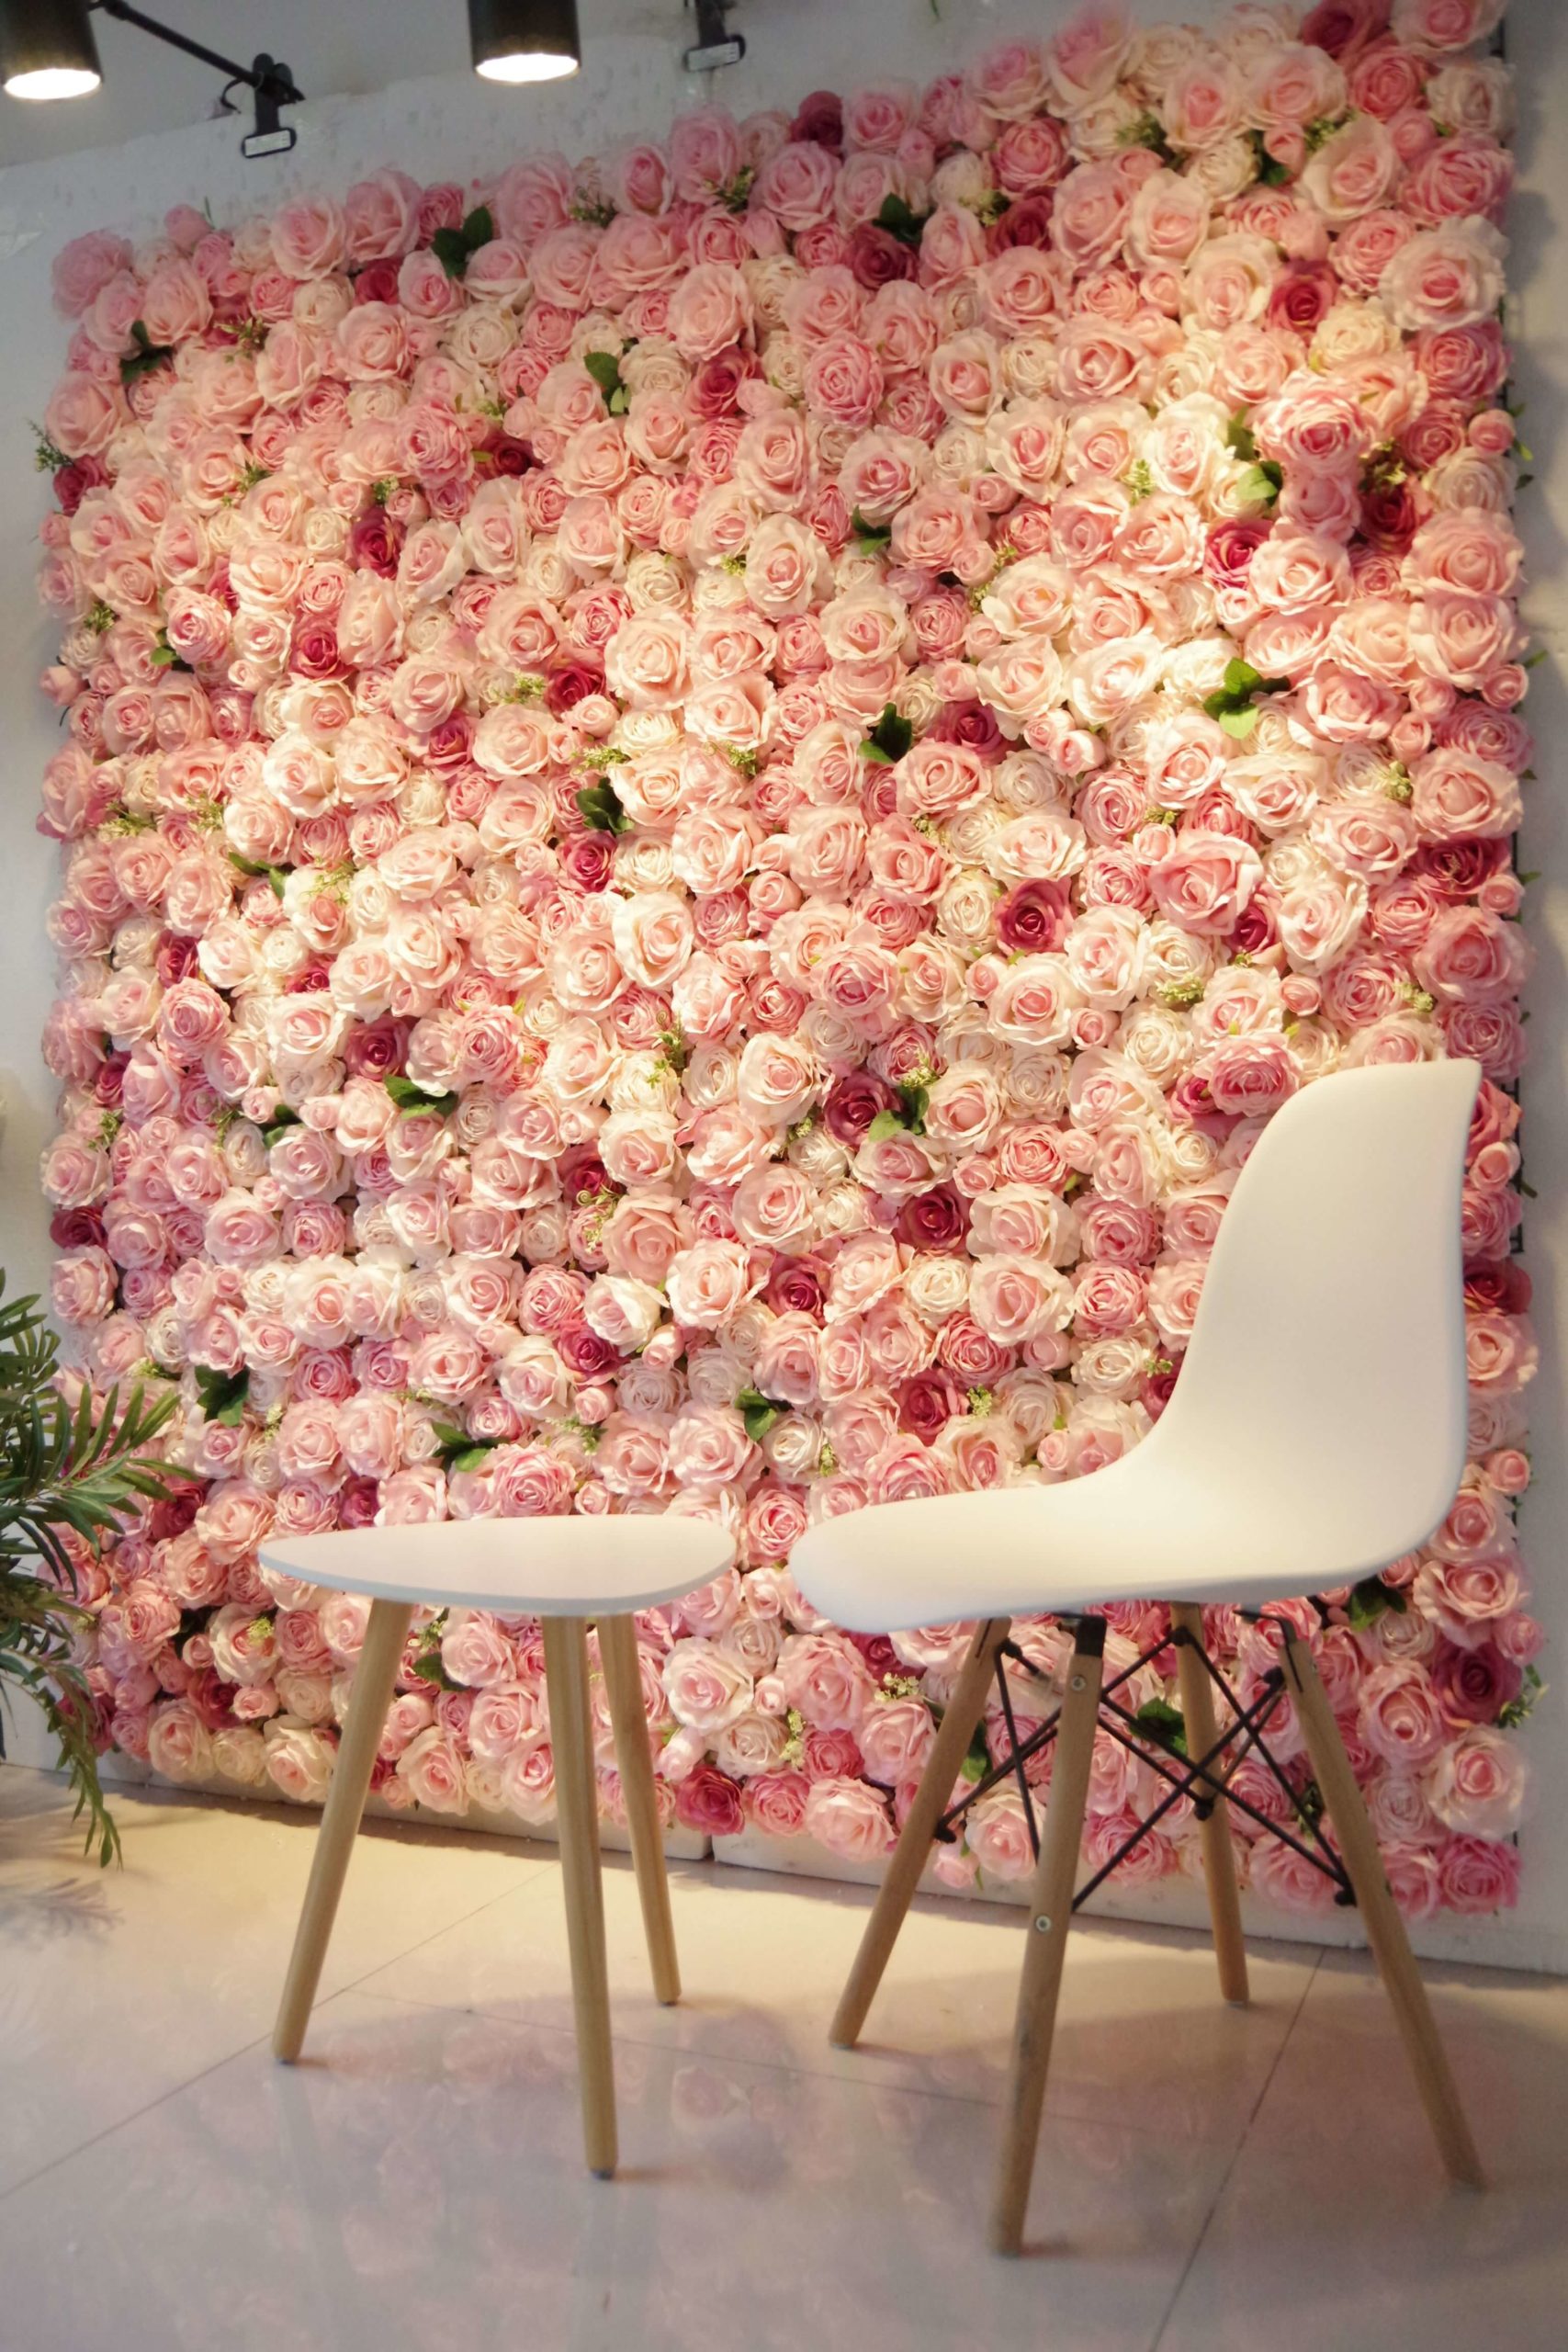 3. A wall full of flowers